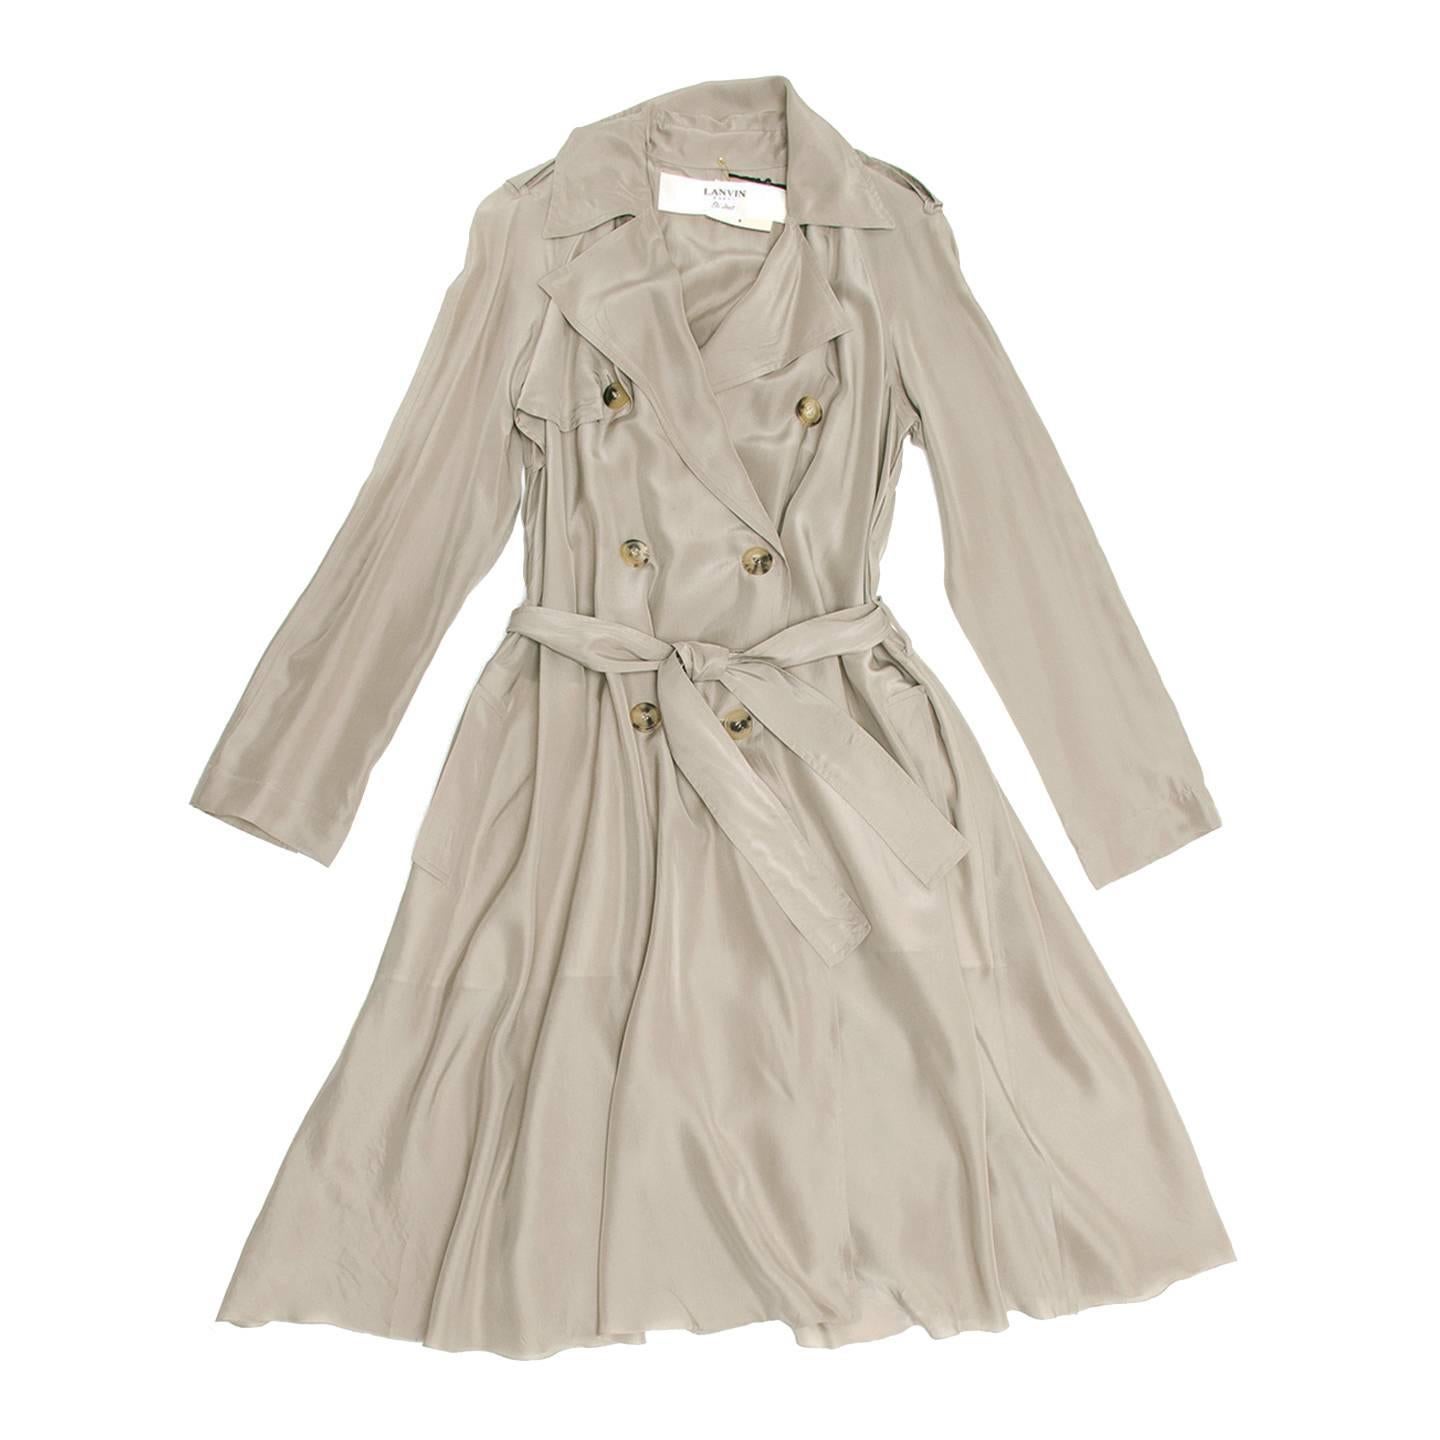 Silk taupe tent shape trench coat with narrow shoulders, very flared hem, knee length and ribbon belted waist. A deep inverted pleat at back create a larger volume, the waist is tighten by a tone-on-tone belt and the double breasted front fastens